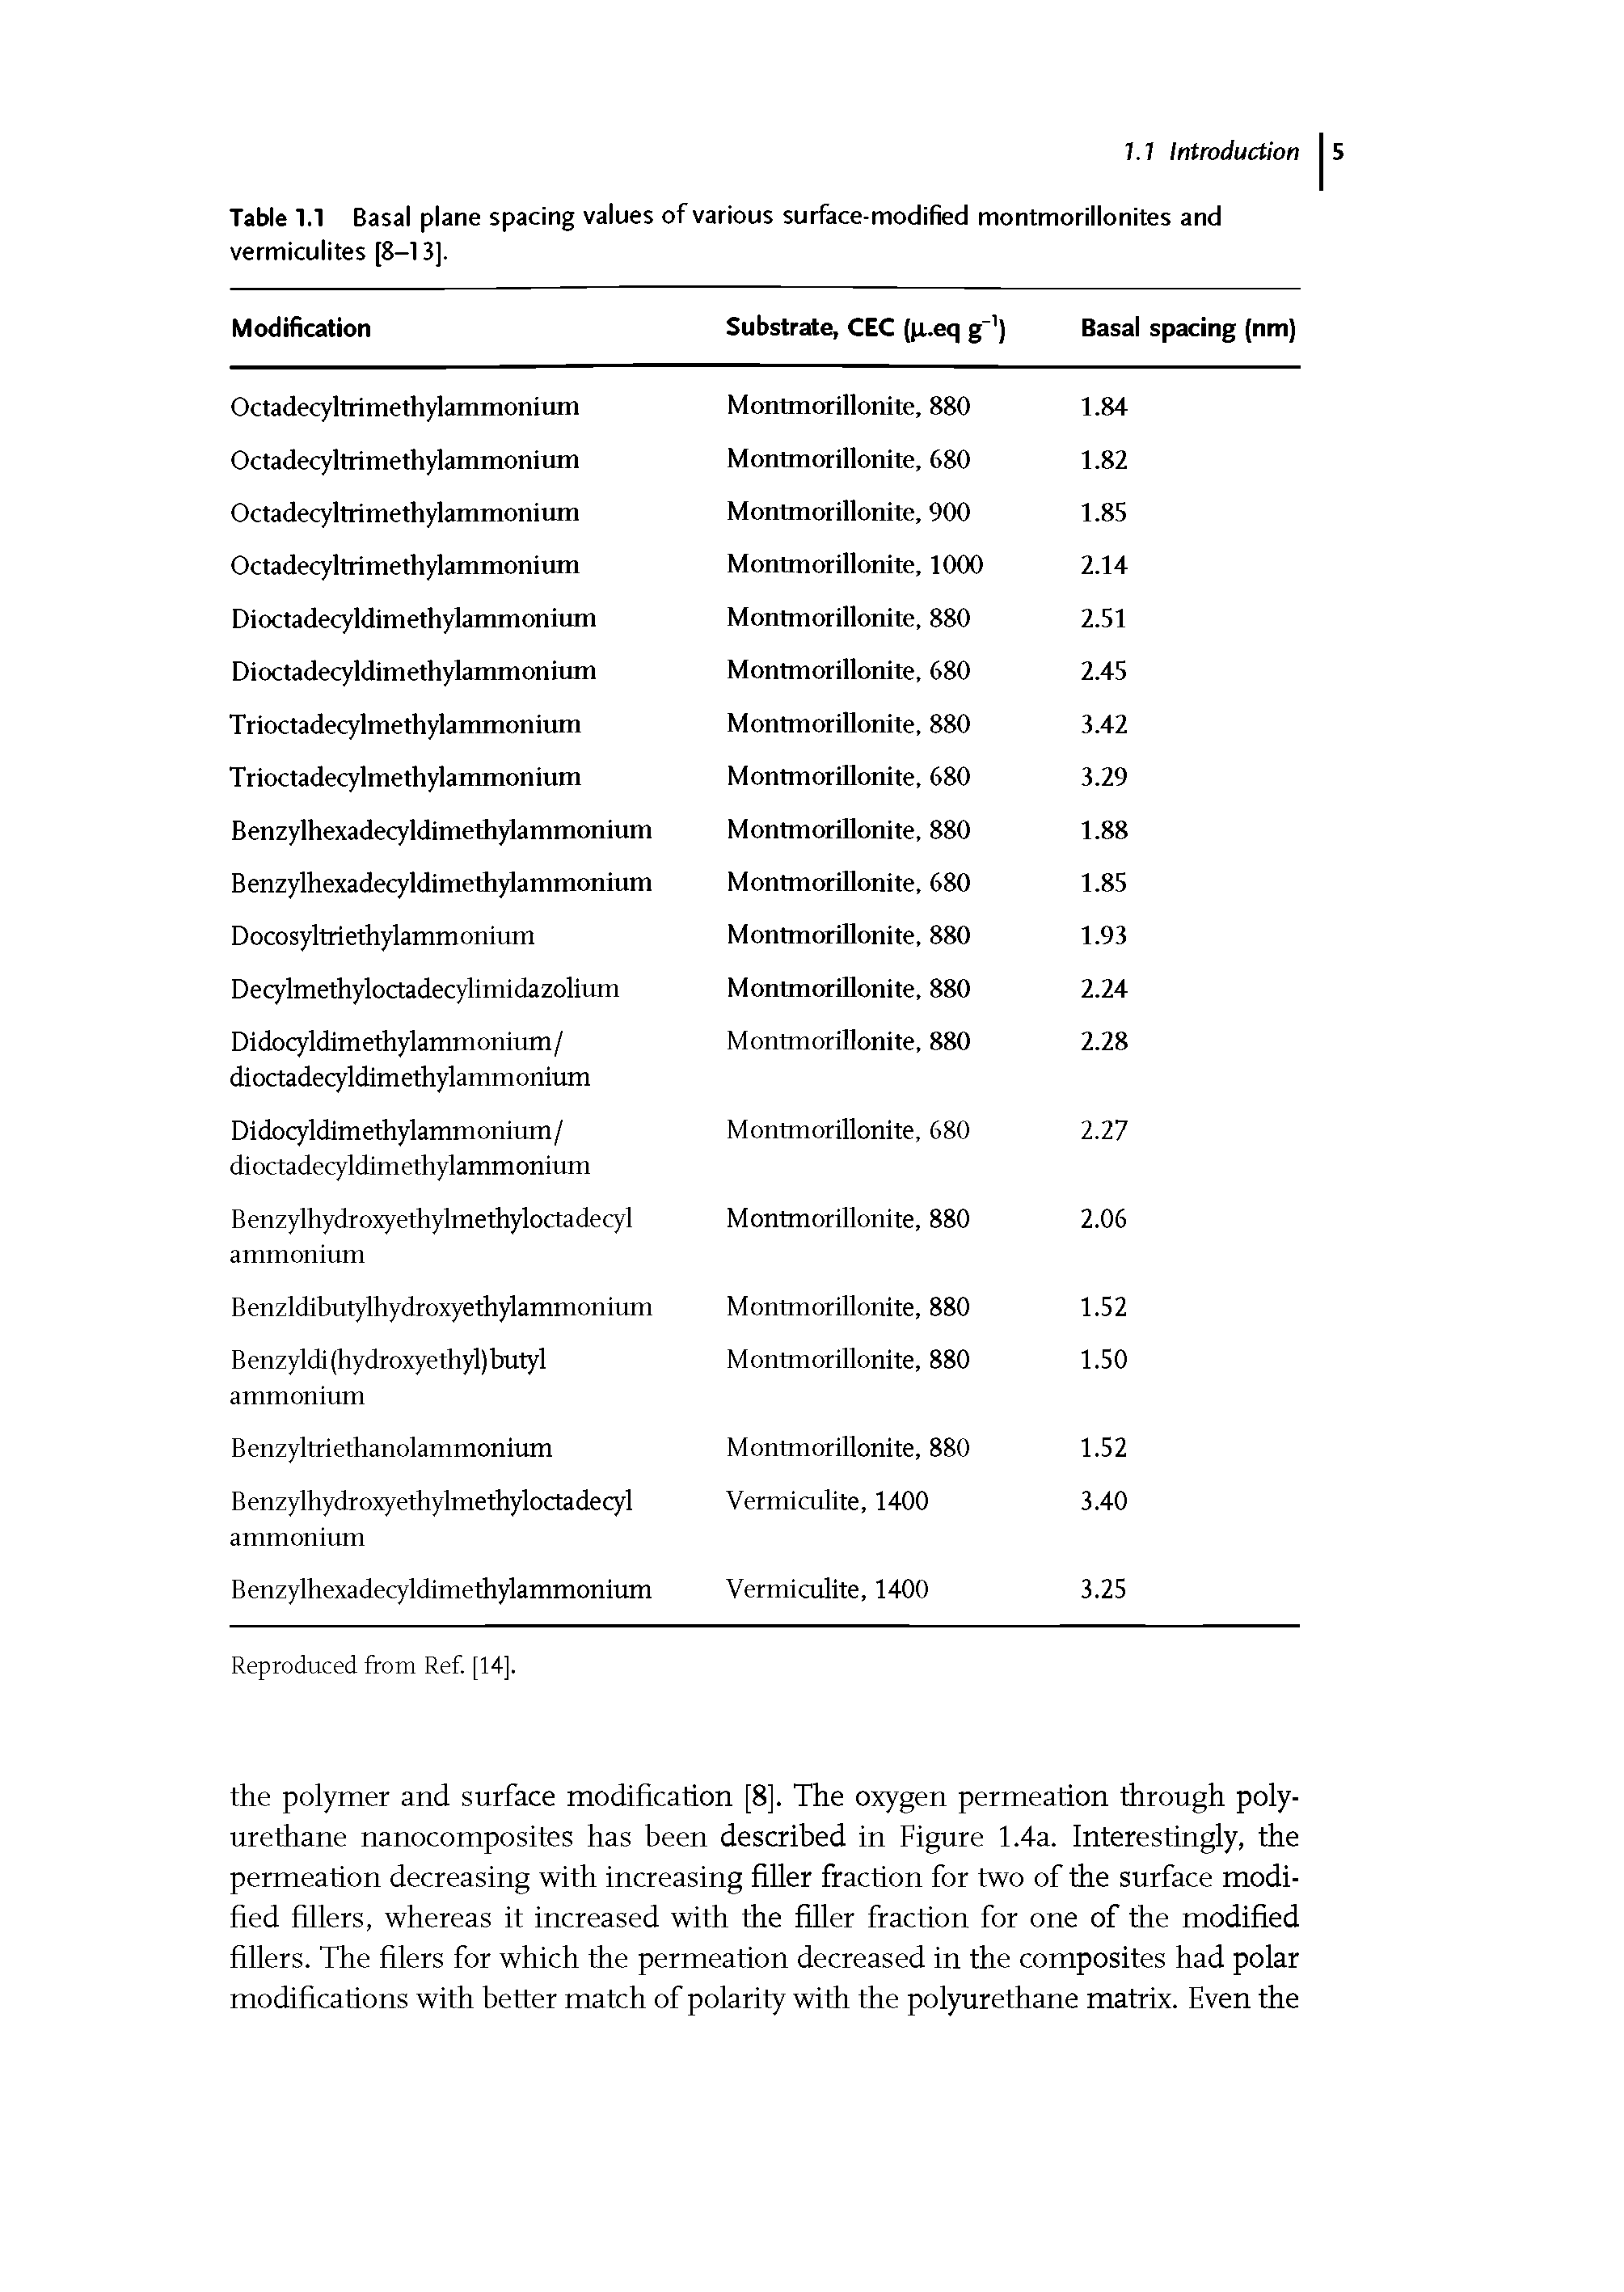 Table 1.1 Basal plane spacing values of various surface-modified montmorillonites and vermiculites [8-13].